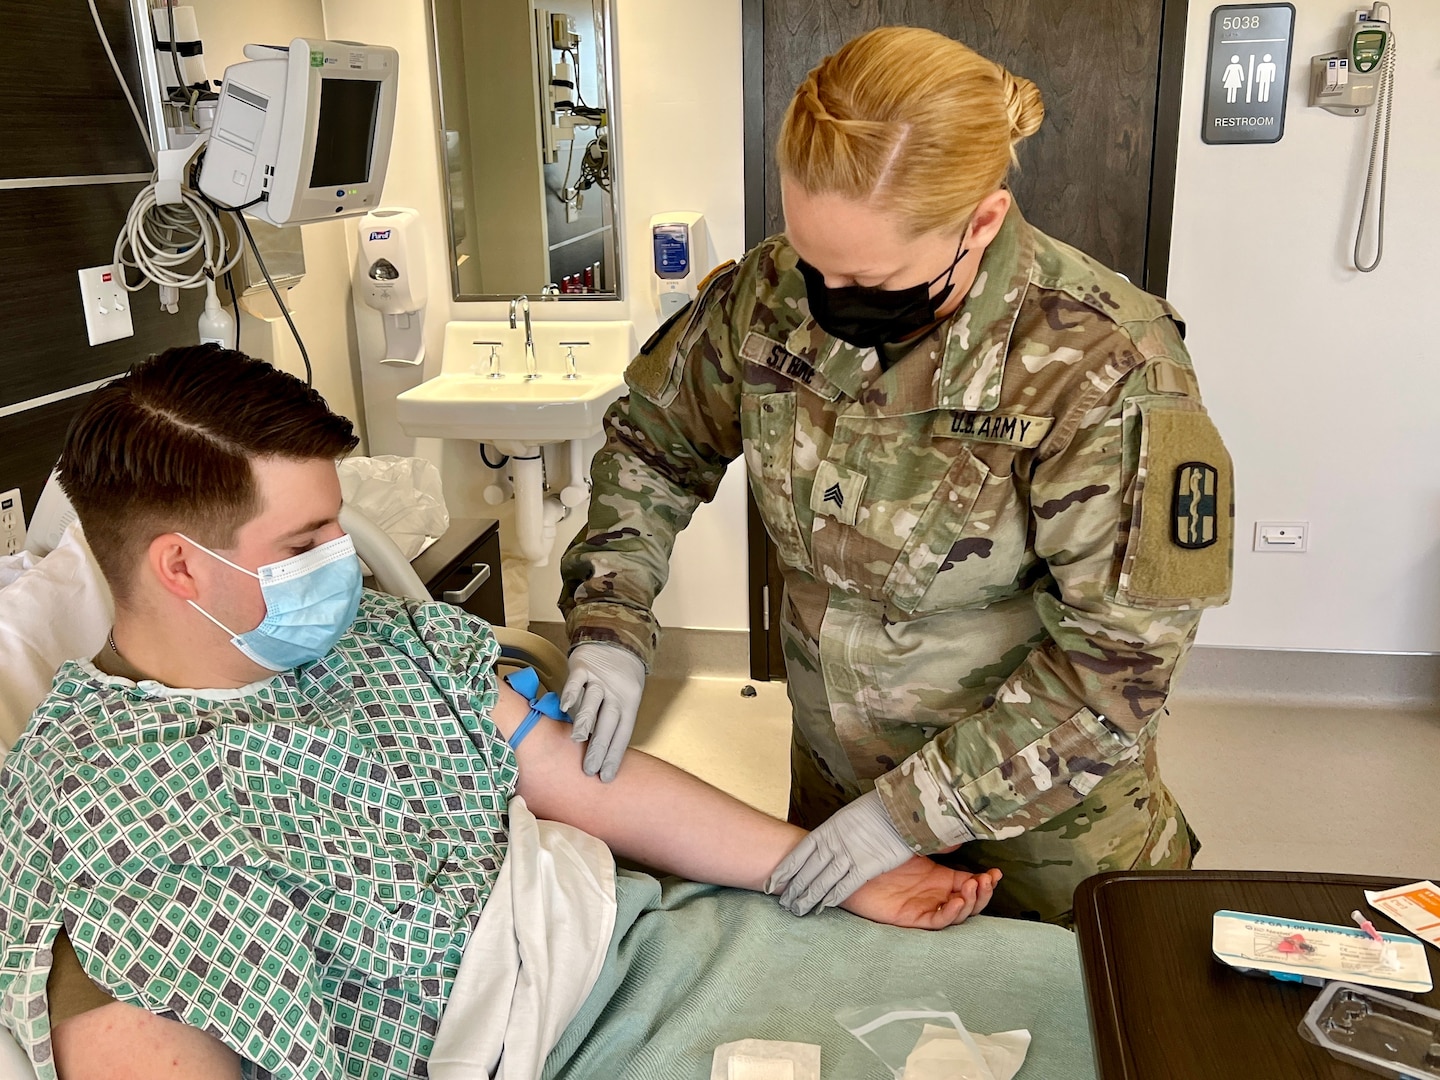 Sgt. Jenna Stroke, licensed practical nurse with the 433rd Medical Detachment, 115th Field Hospital, 32nd Hospital Center, prepares to administer fluids intravenously to Sgt. Jacob Phelps during the medical skills readiness rotation hosted by Bayne-Jones Army Community Hospital.